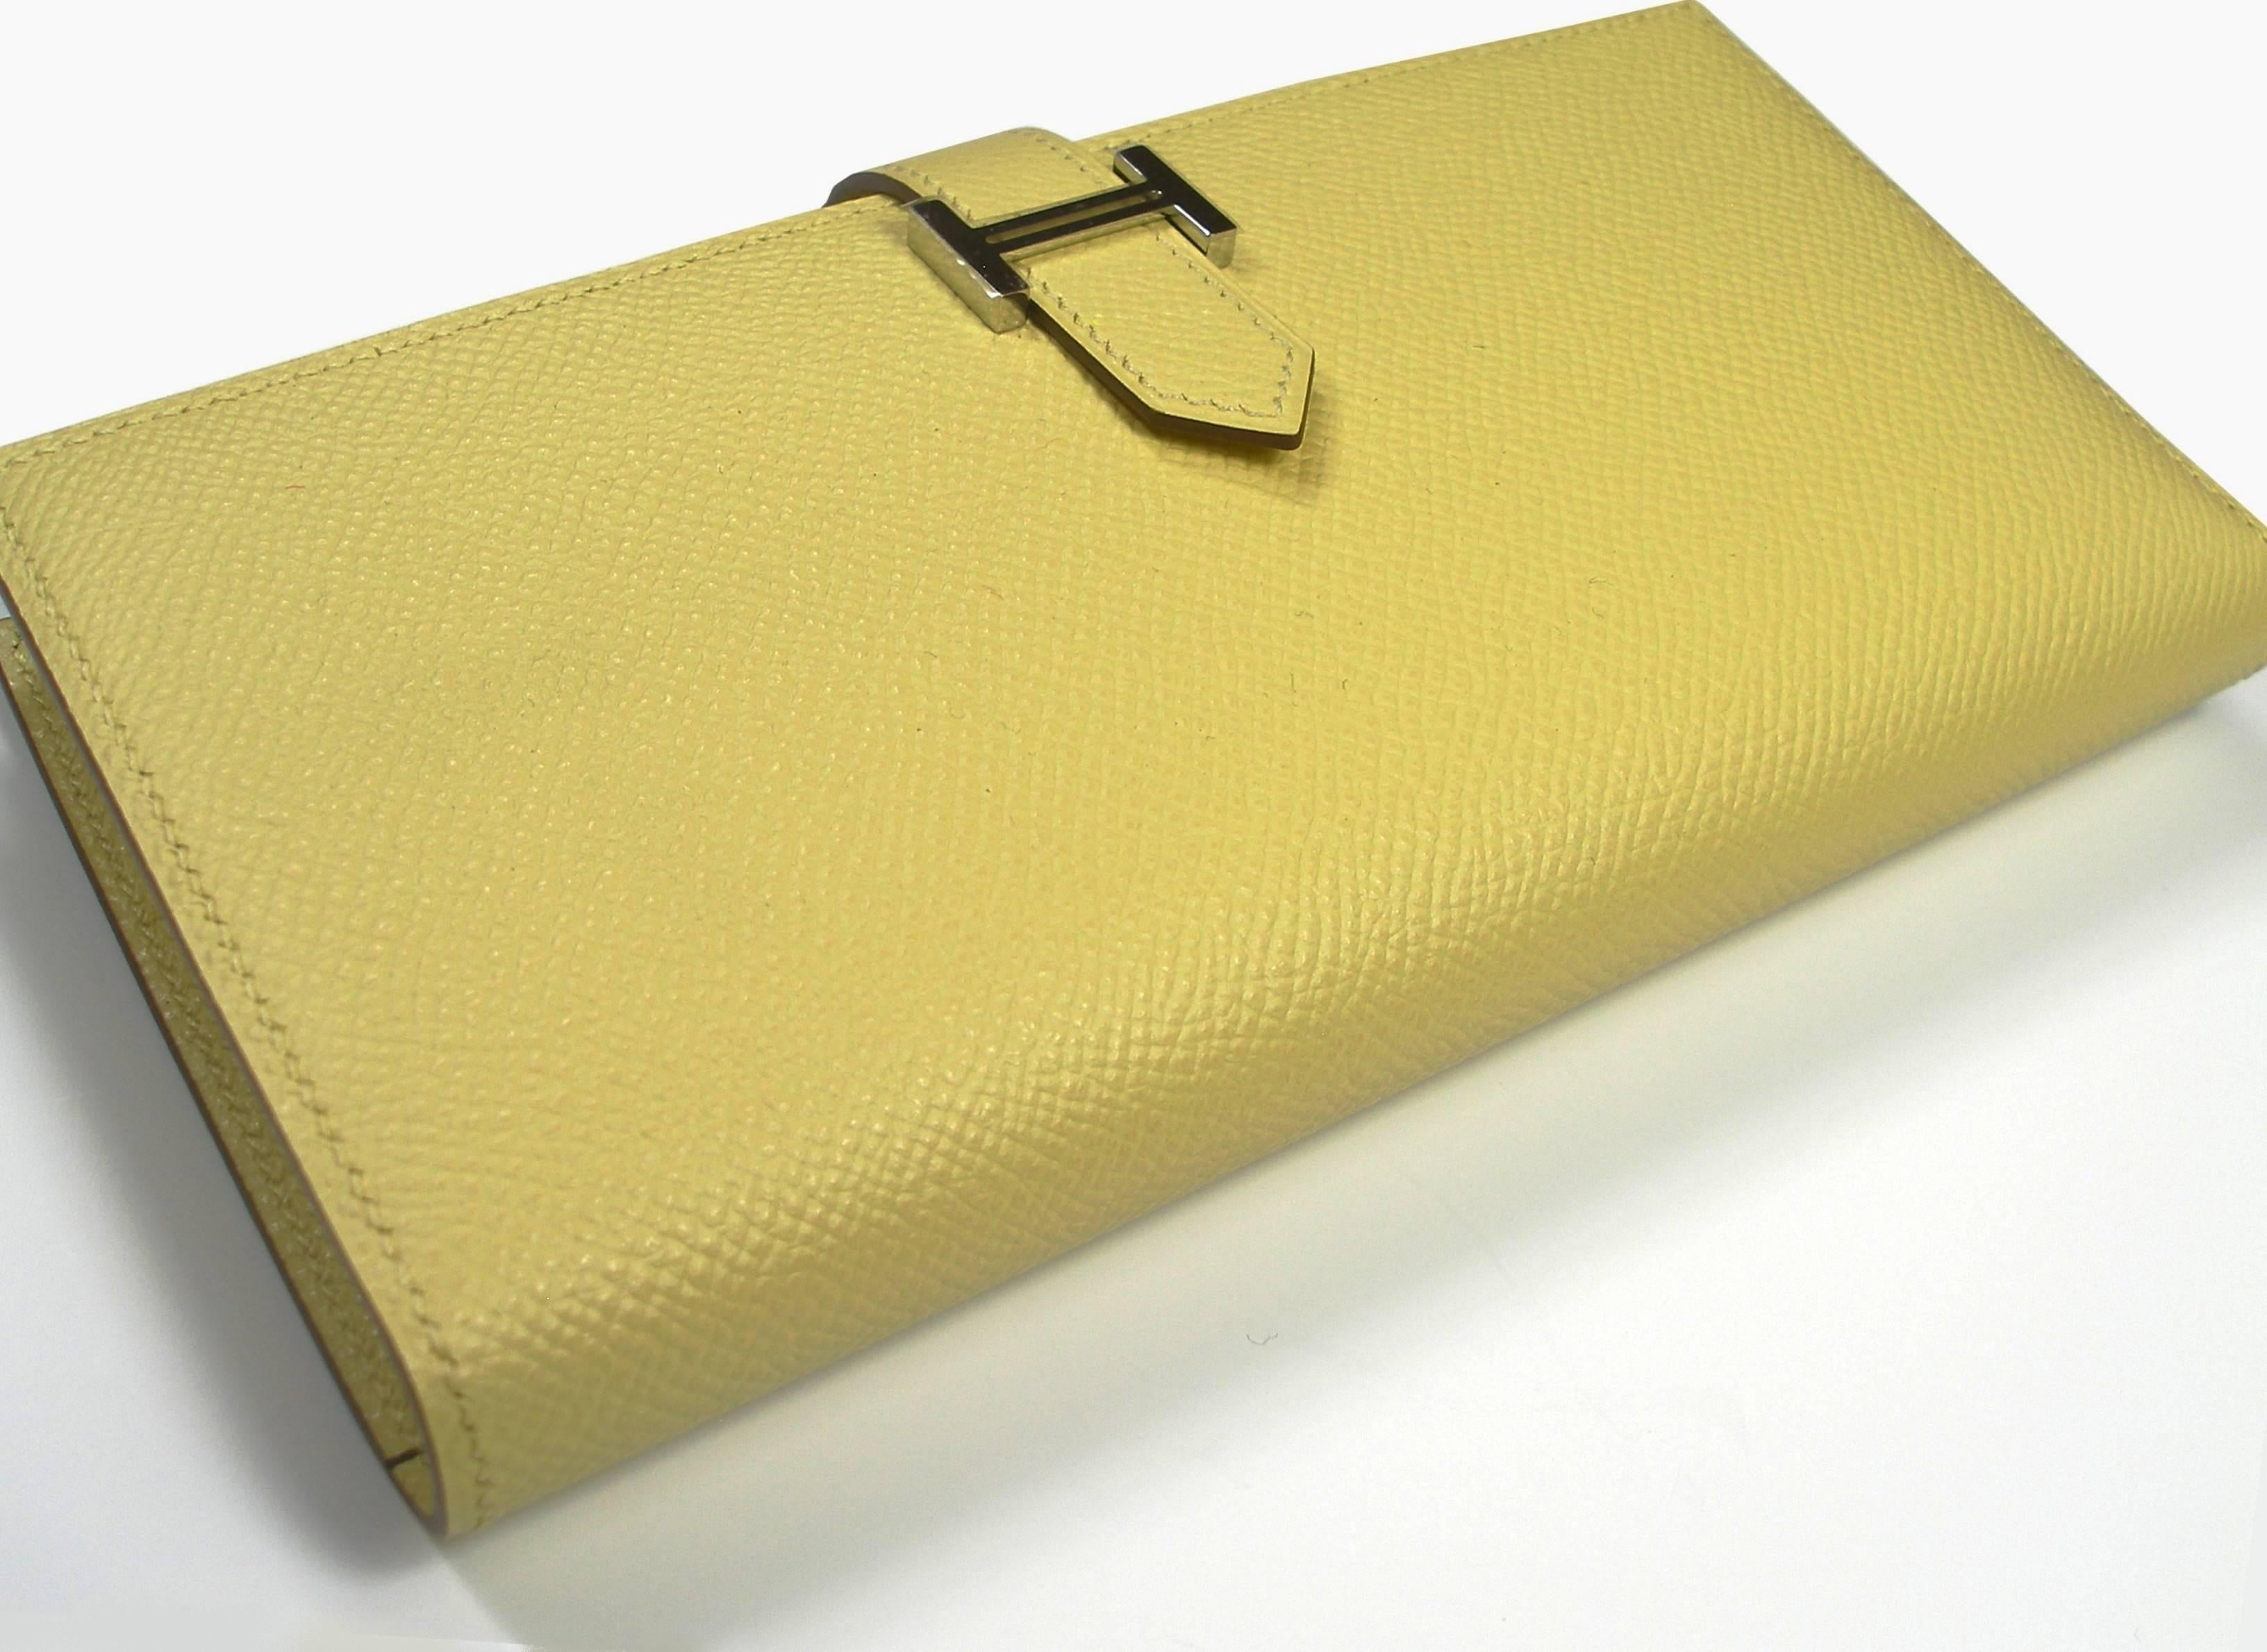 Hermès Béarn Soufflet Wallet
Epsom Leather
Color : Jaune poussin 
Stamp : T / Production 2015 INSIDE .
Plastic is still on PALLADIUM HW 
PLEASE NOTE FOR THIS PURCHASE : S next to Hermès Paris , its comes from Private sales Hermès reserved to Hermès